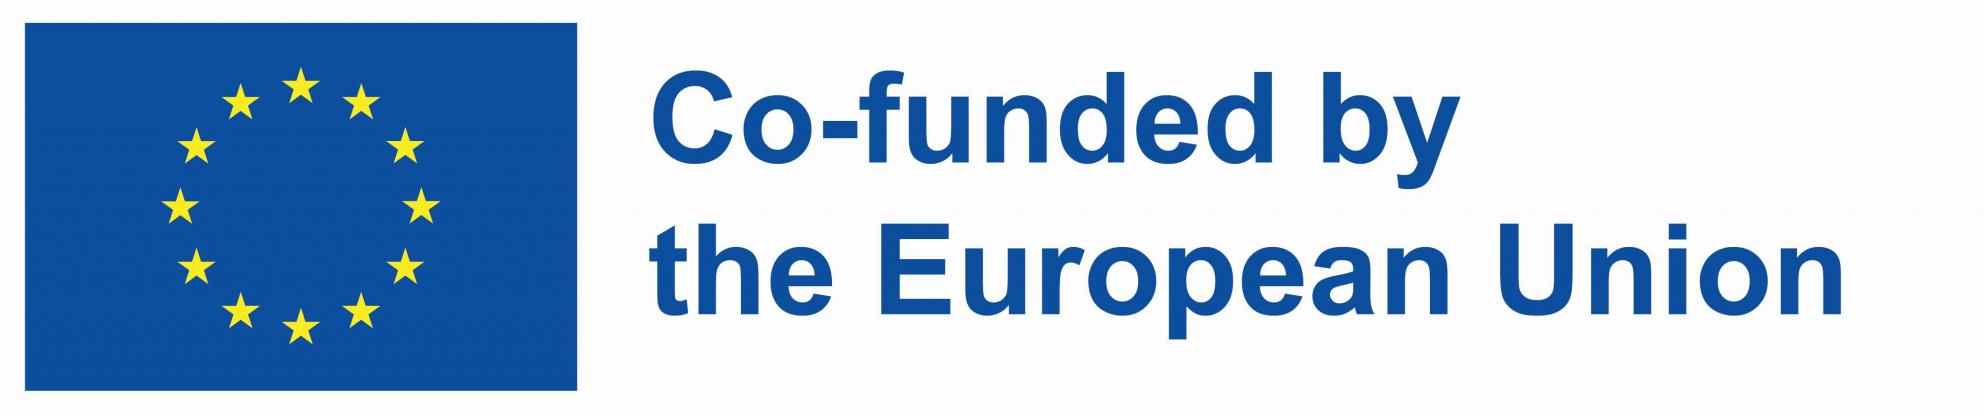 The logotype of UE with text: co-funded by the European Union